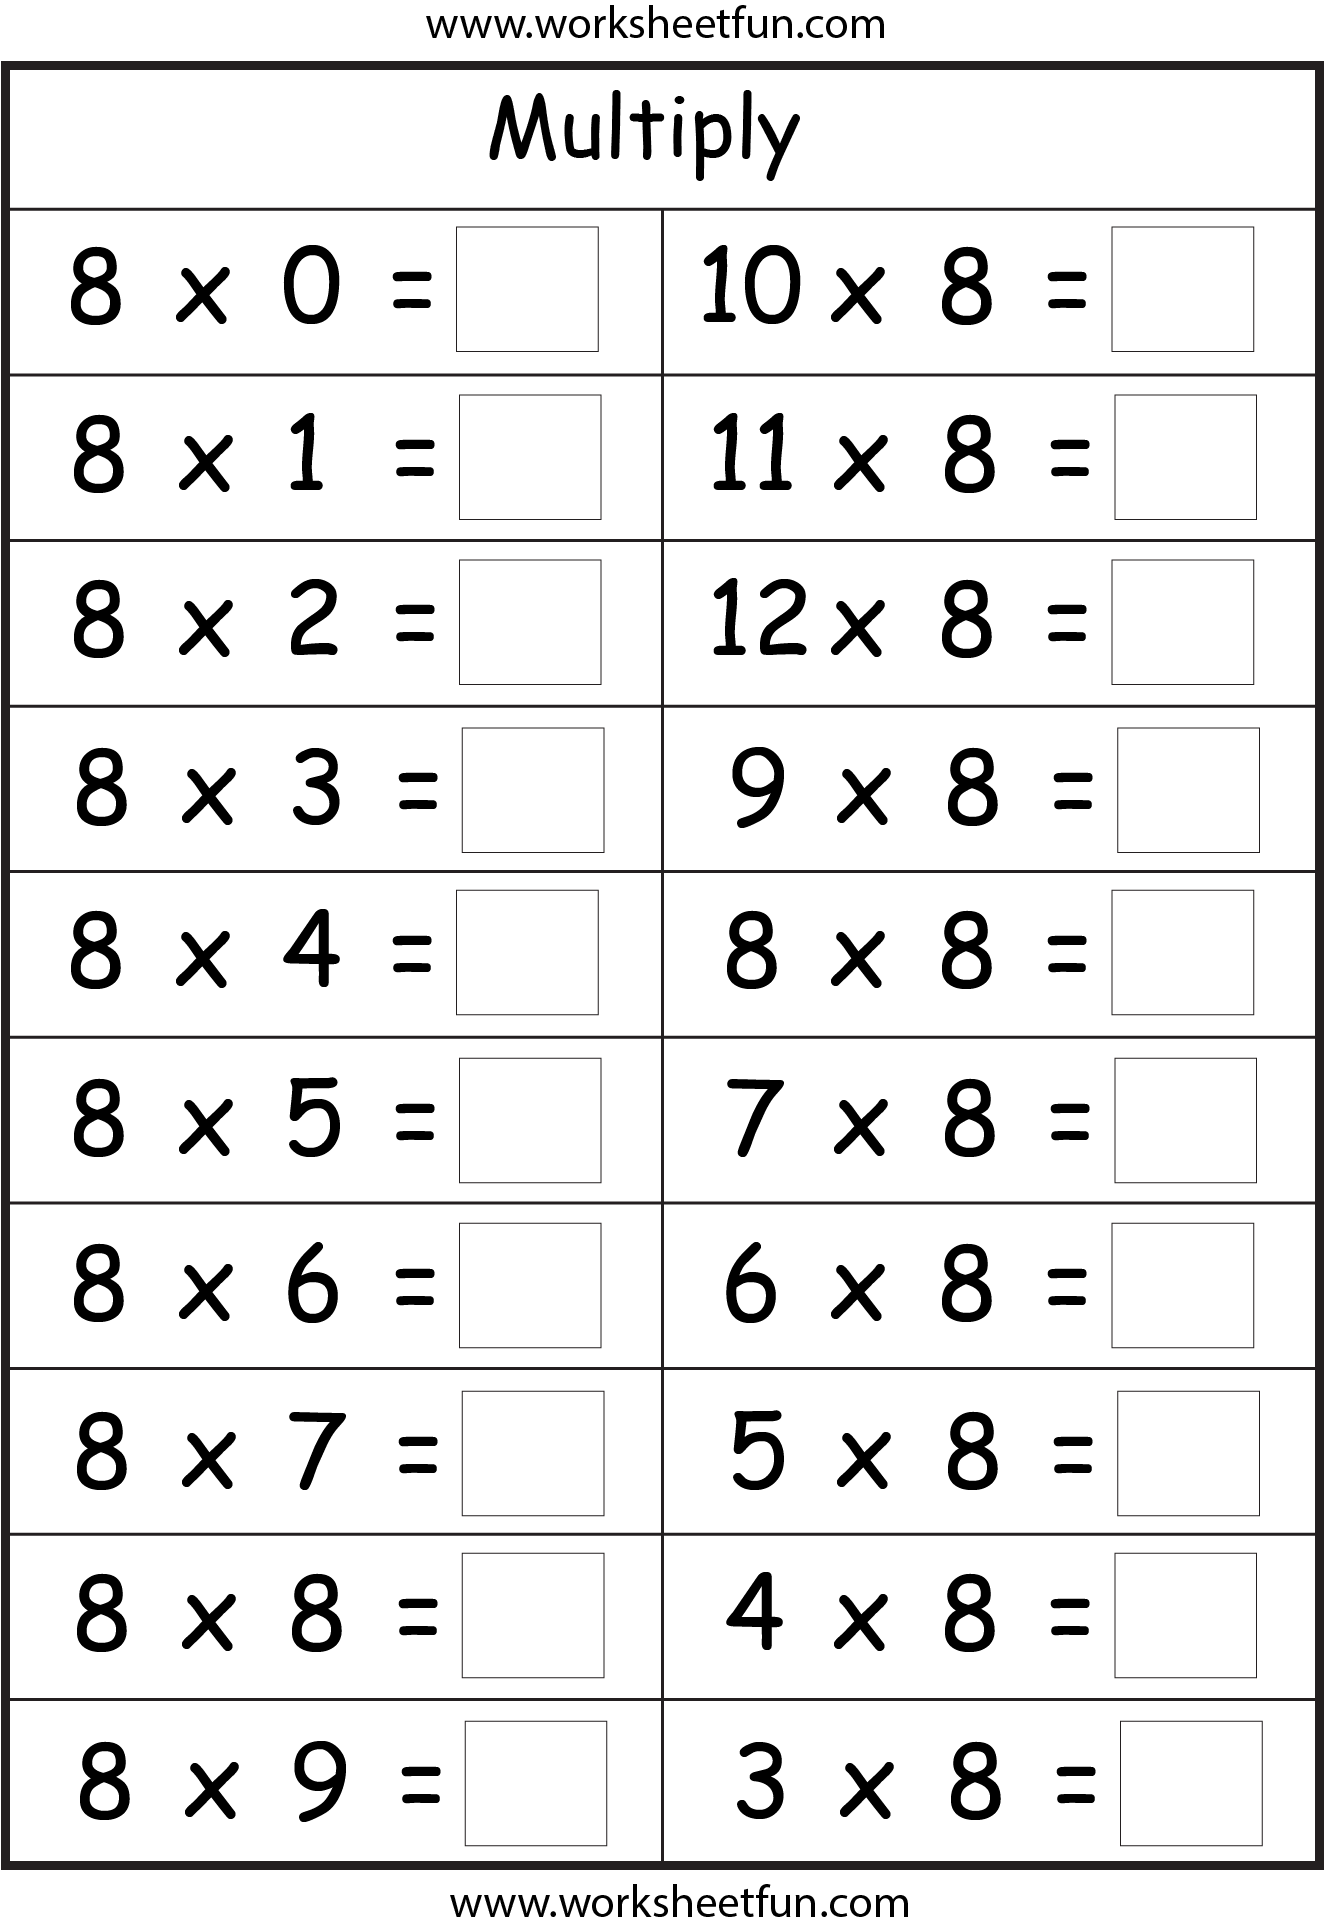 multiplication-facts-worksheets-understanding-multiplication-to-10x10